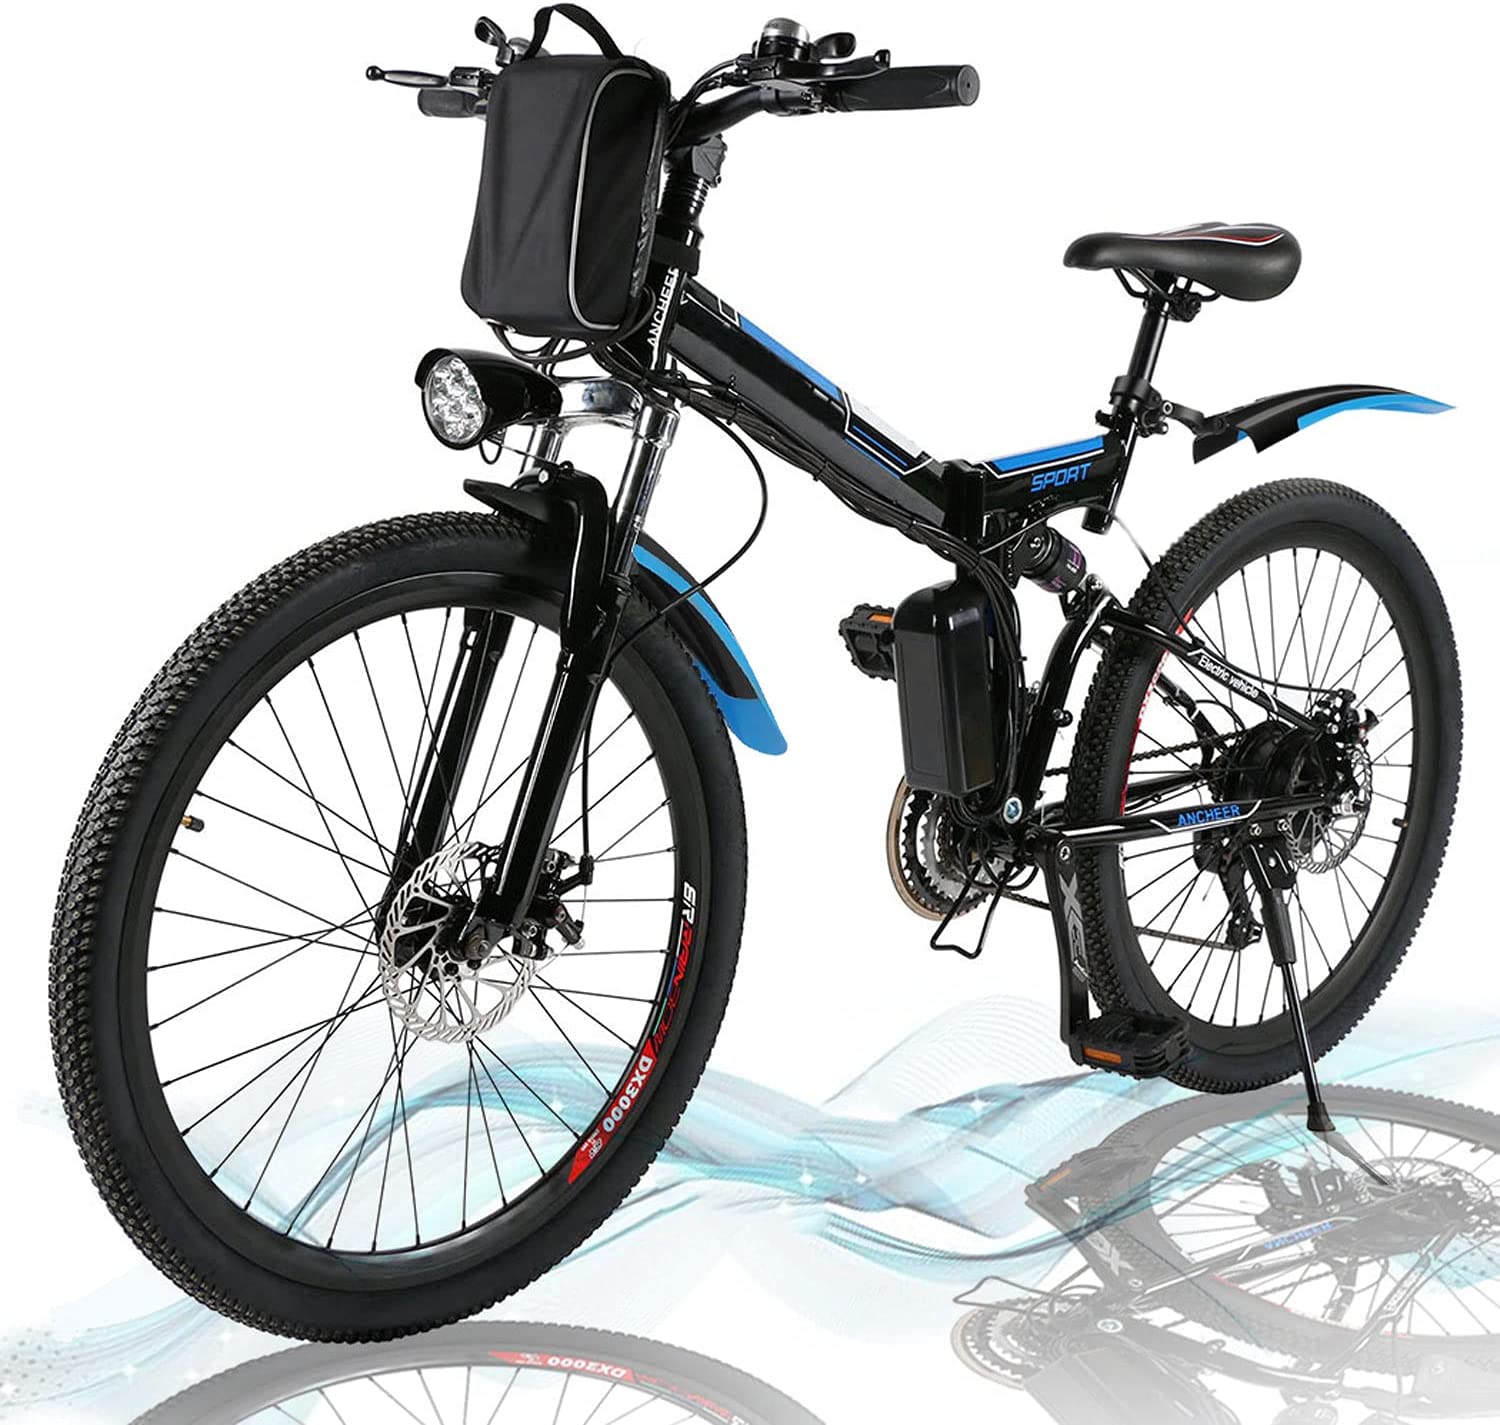  1. Angotrade 26-inch Lithium Battery Electric Folding Mountain Bike for Adult 